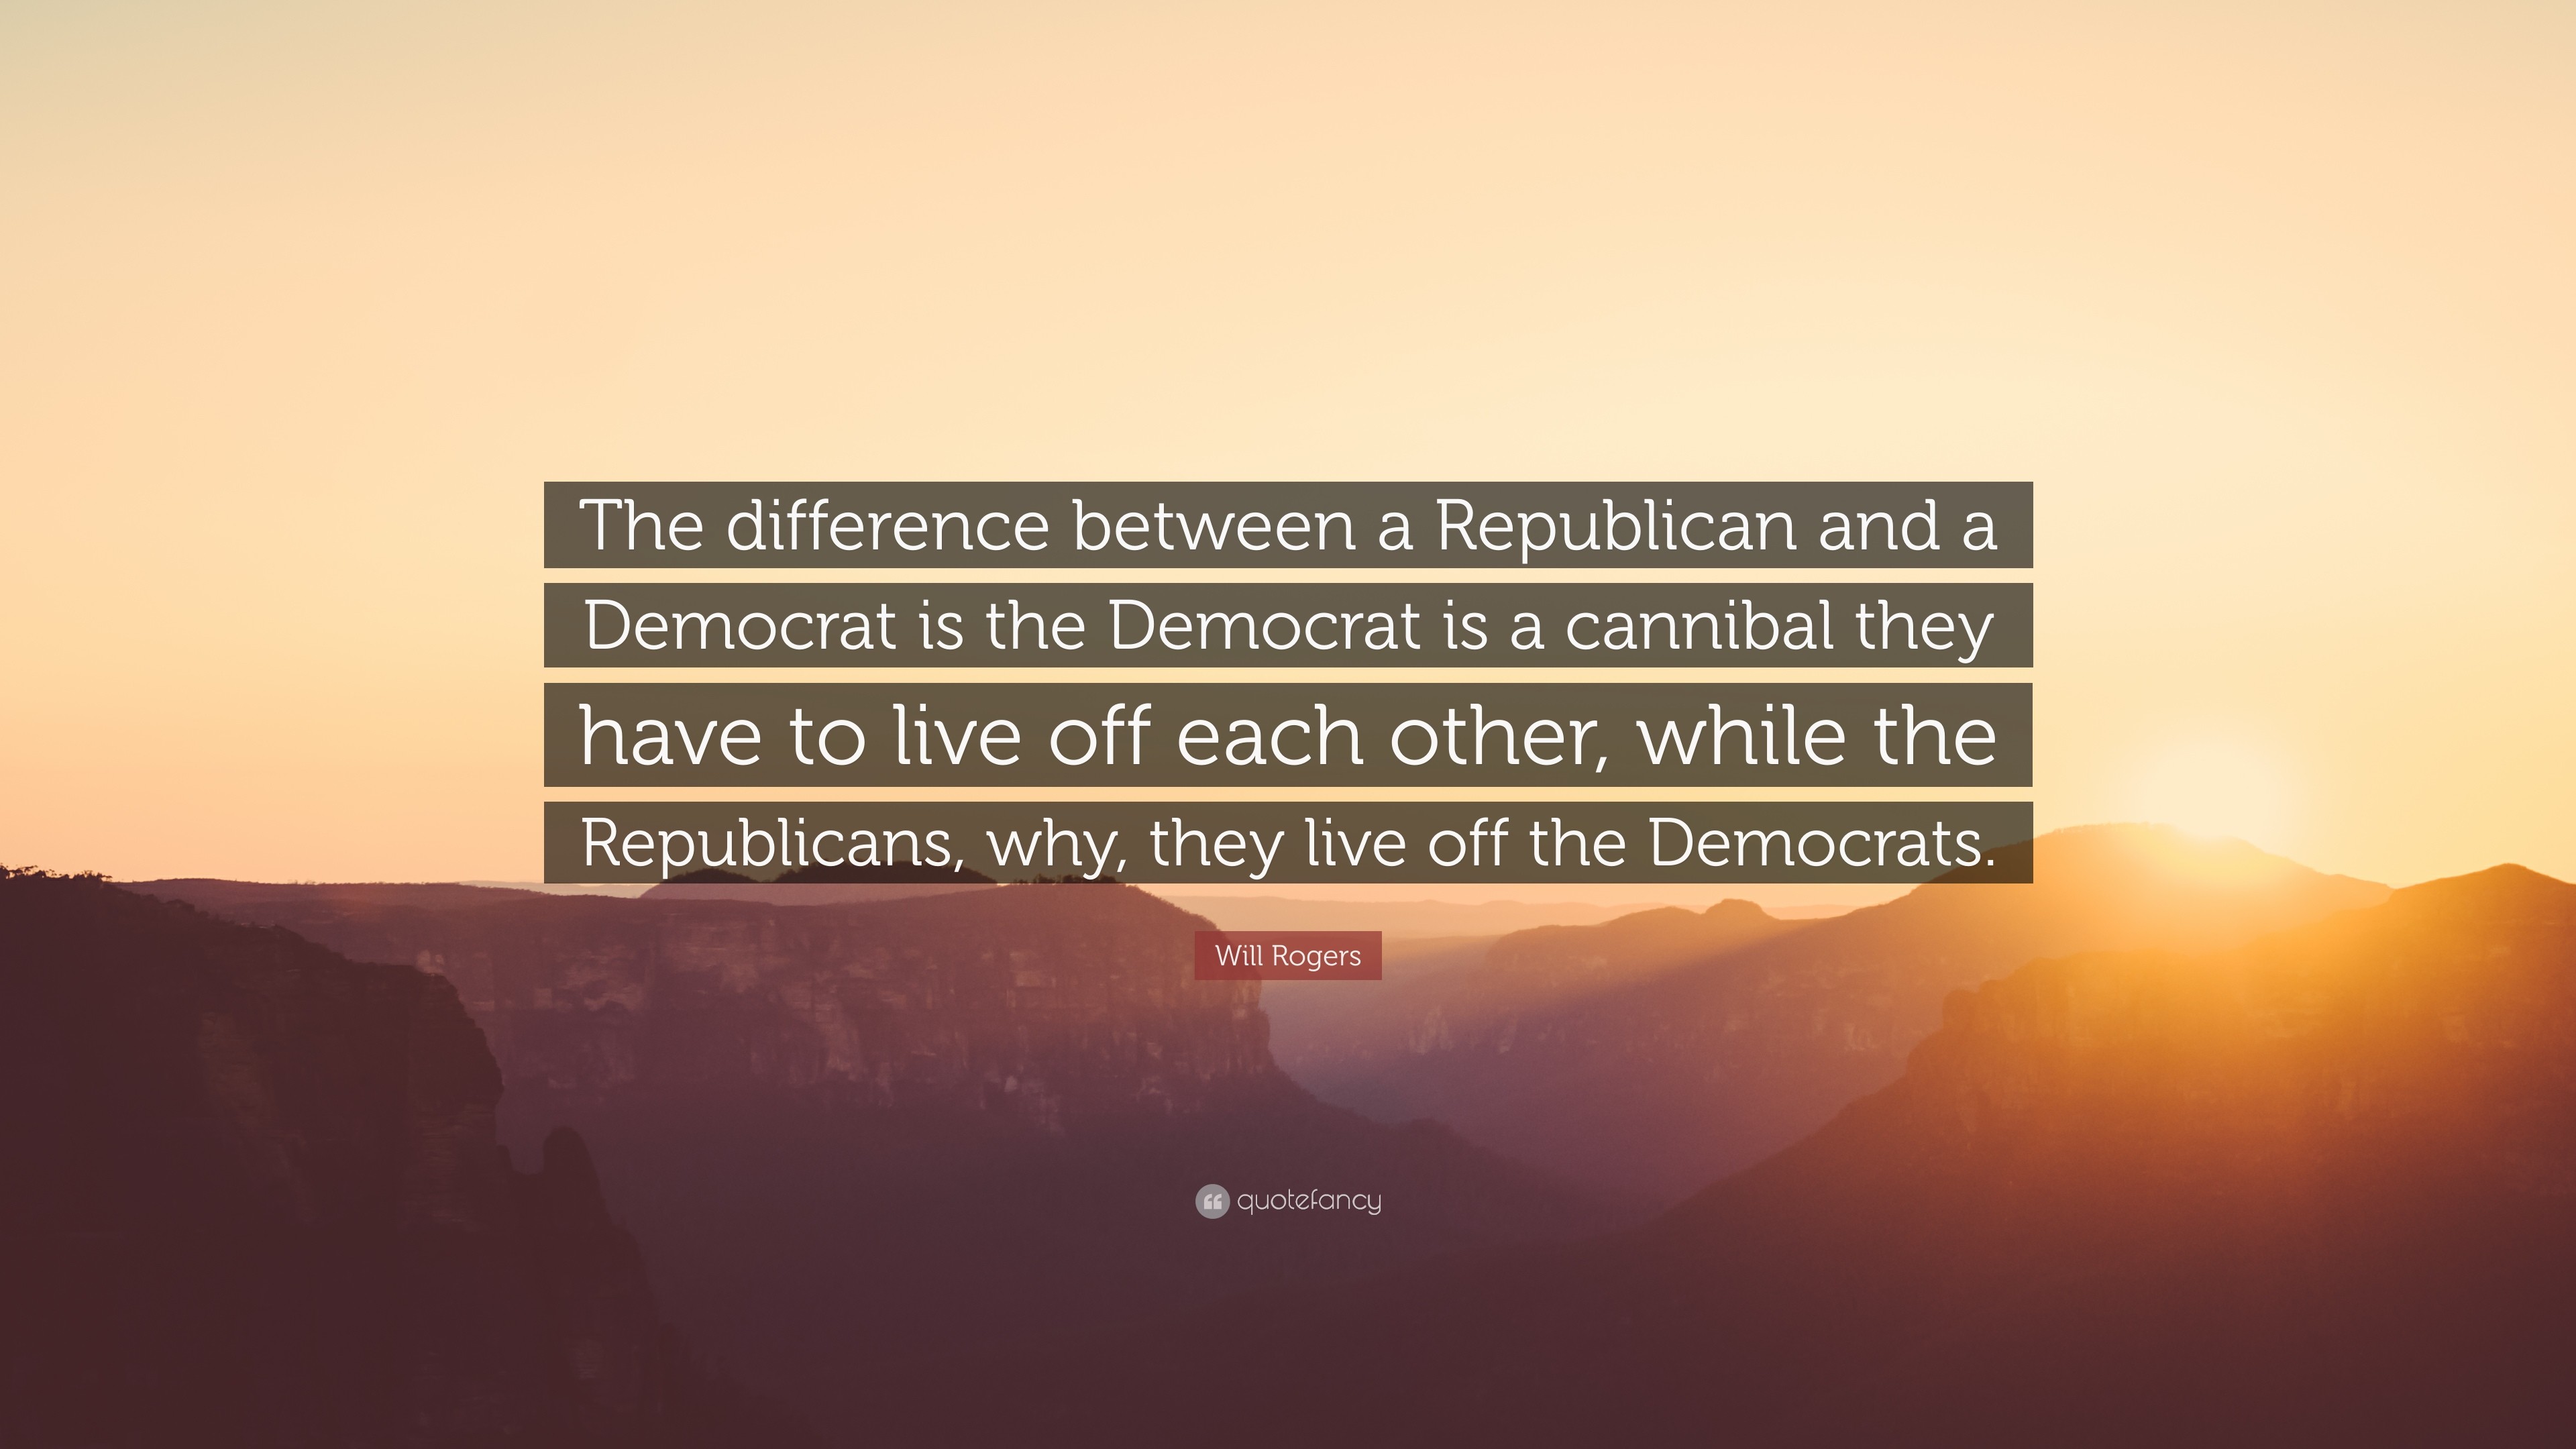 3840x2160 Will Rogers Quote: “The difference between a Republican and a Democrat is  the Democrat